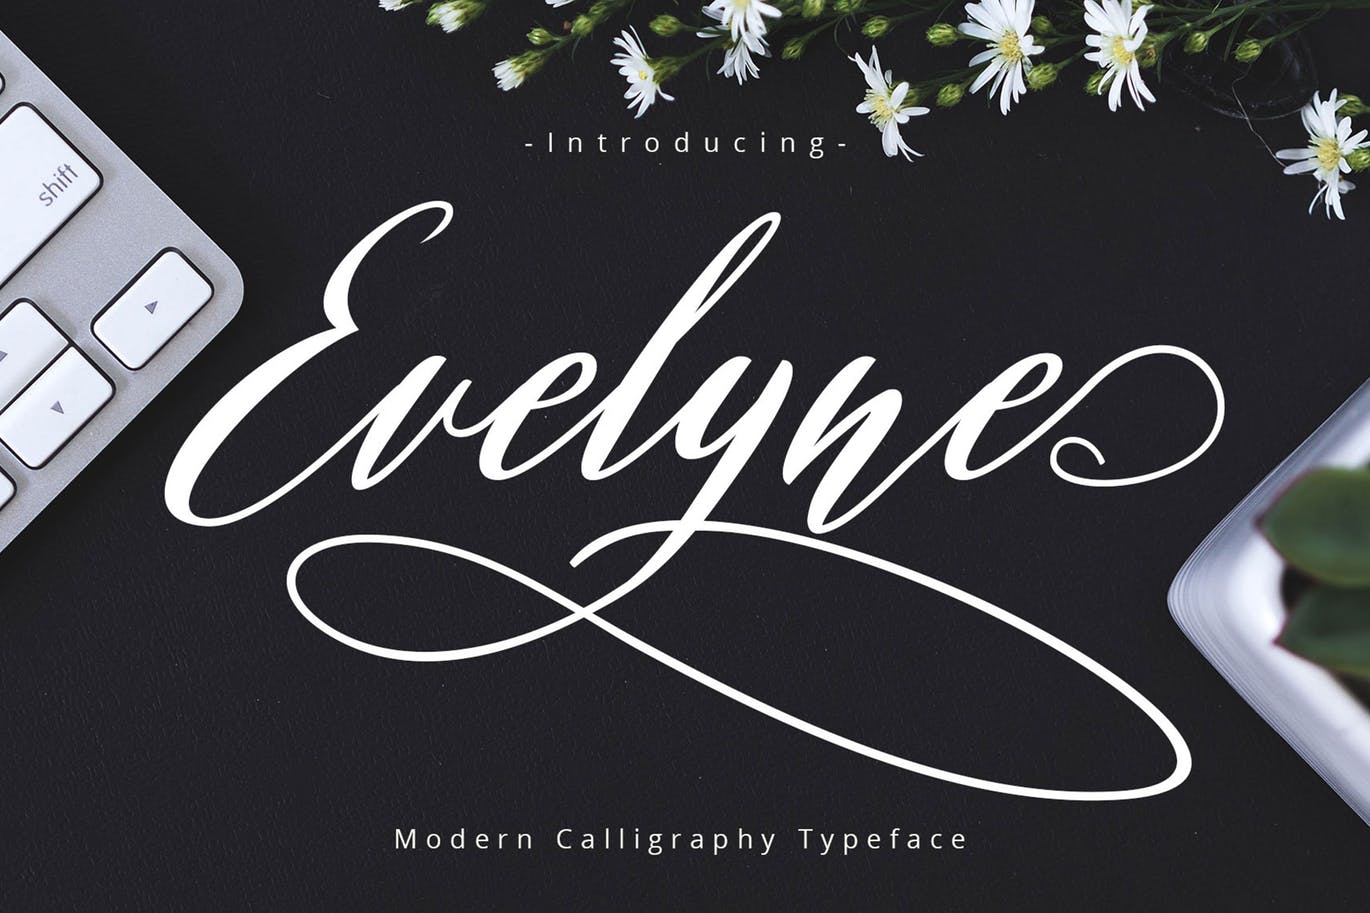 A modern calligraphy typeface